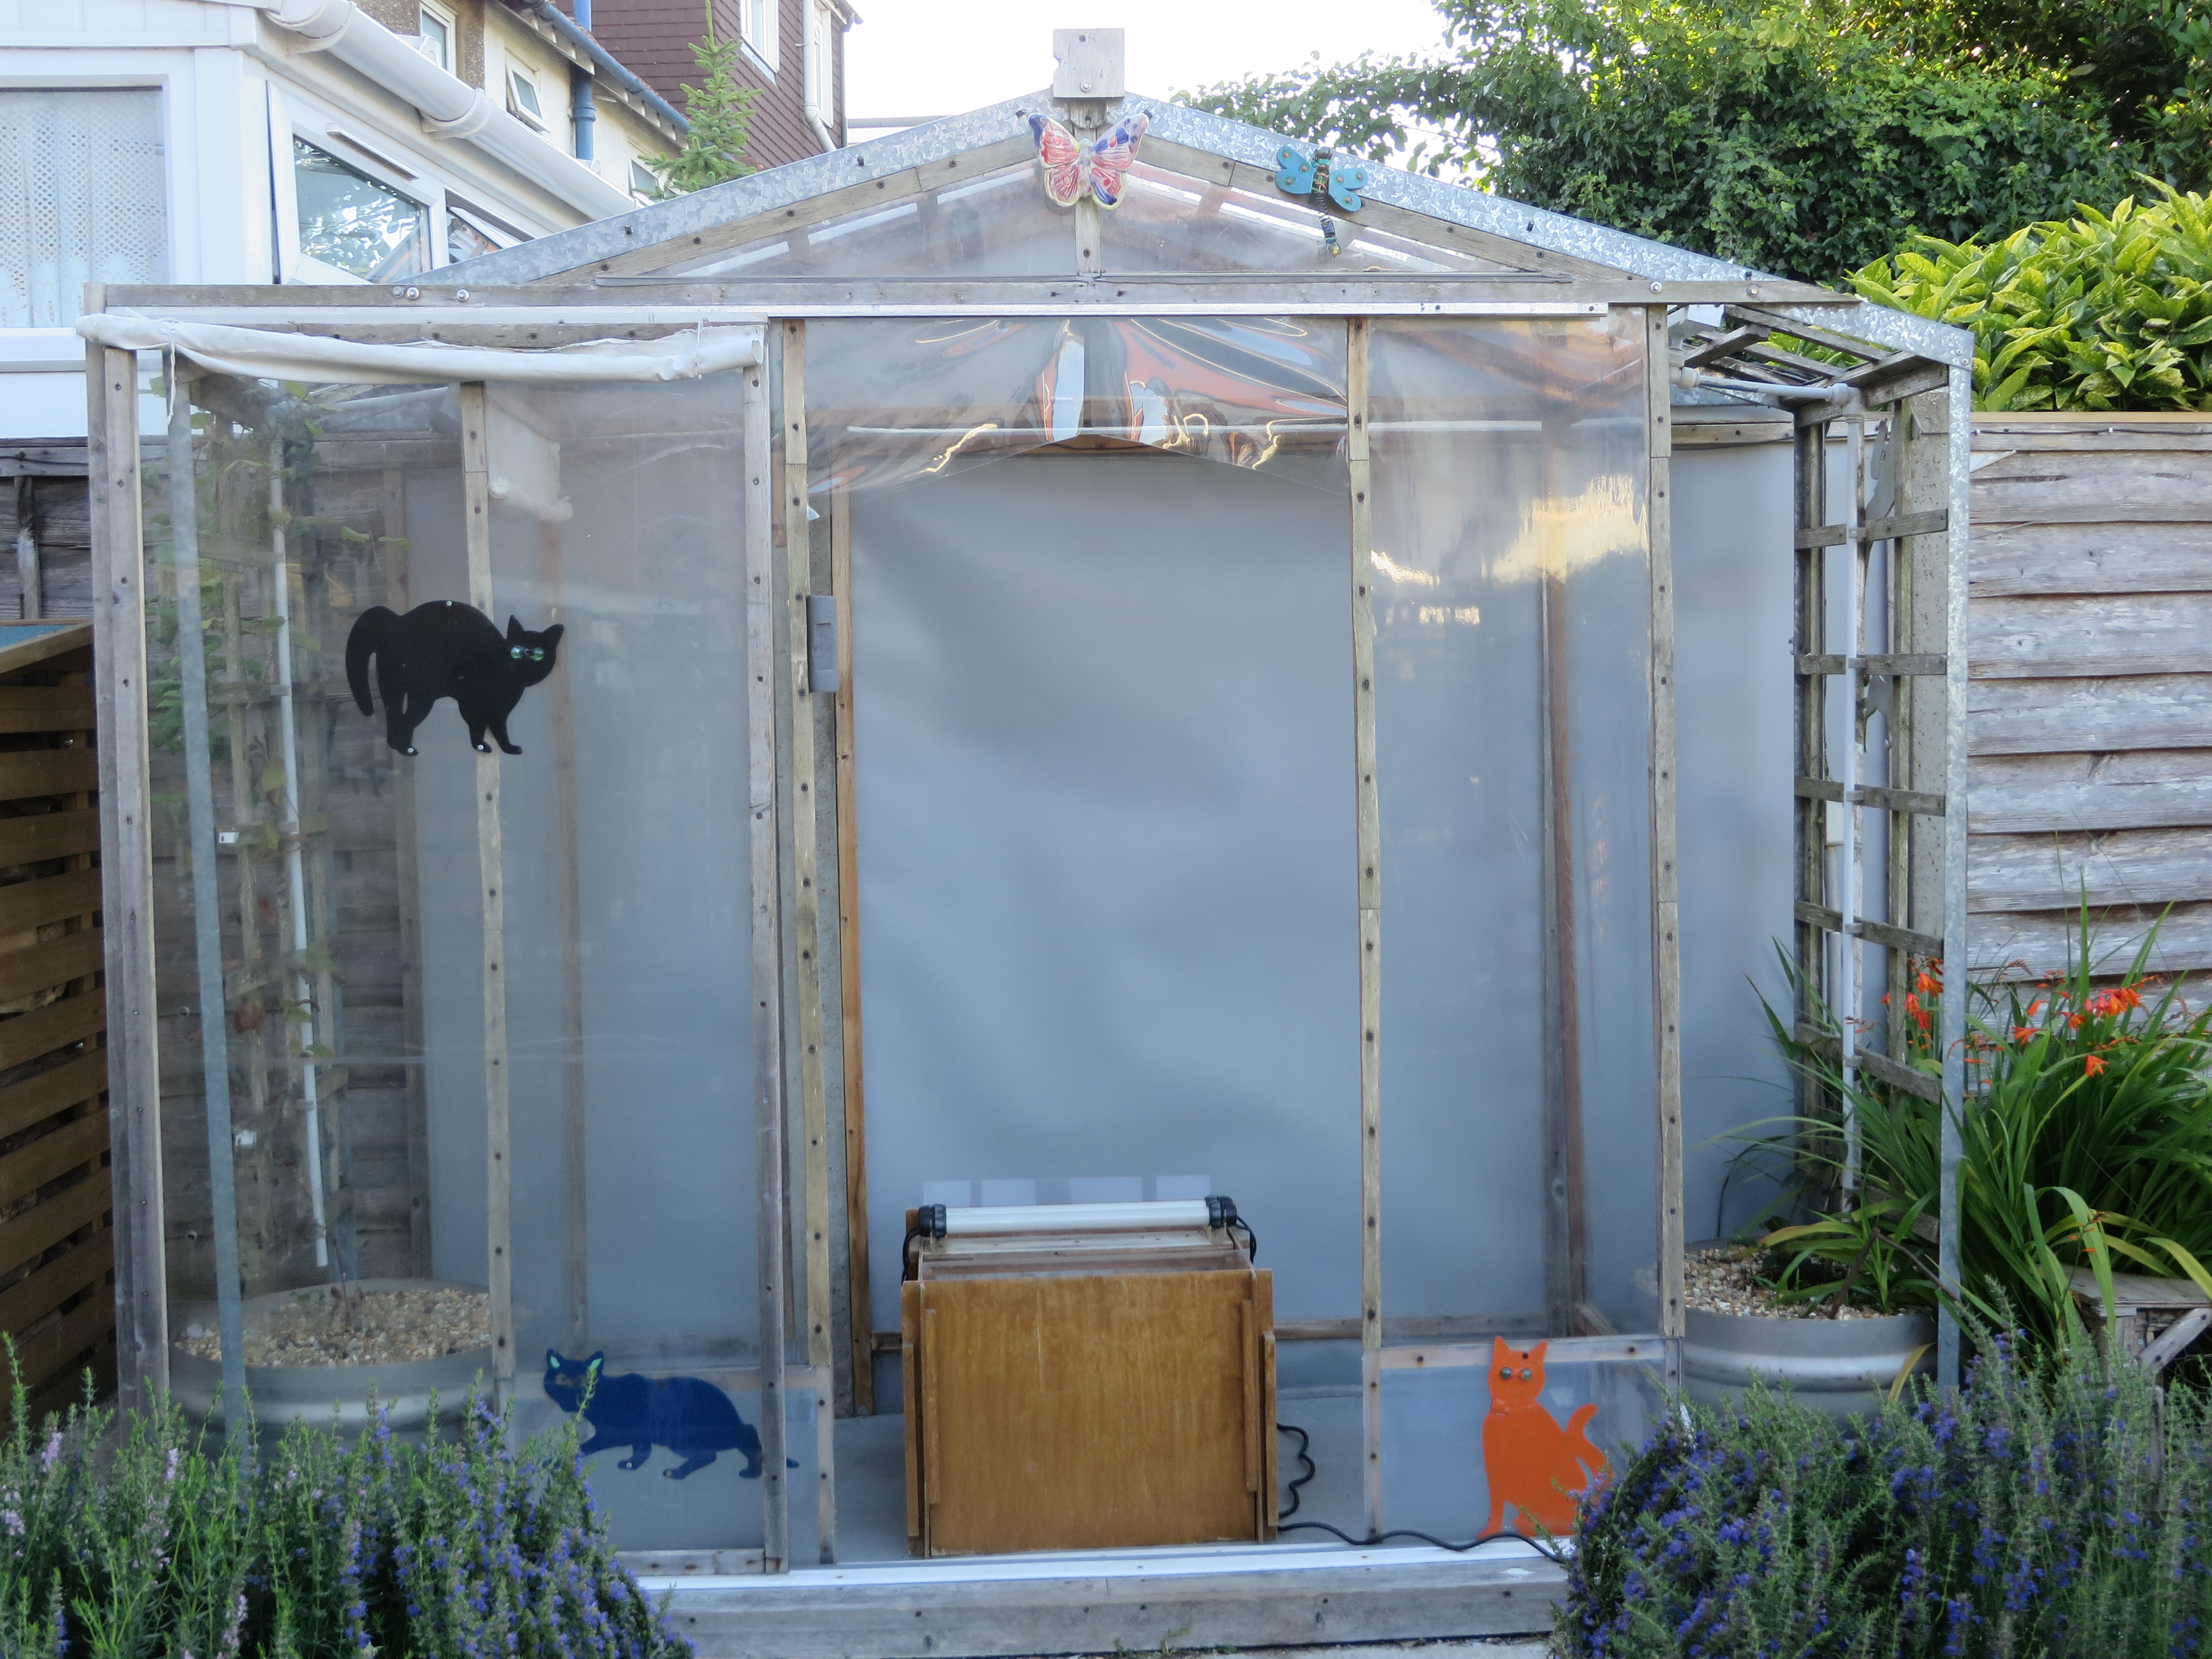 A greenhouse we converted into a moth house by remove the side and roof panels and strenghtening with treillis